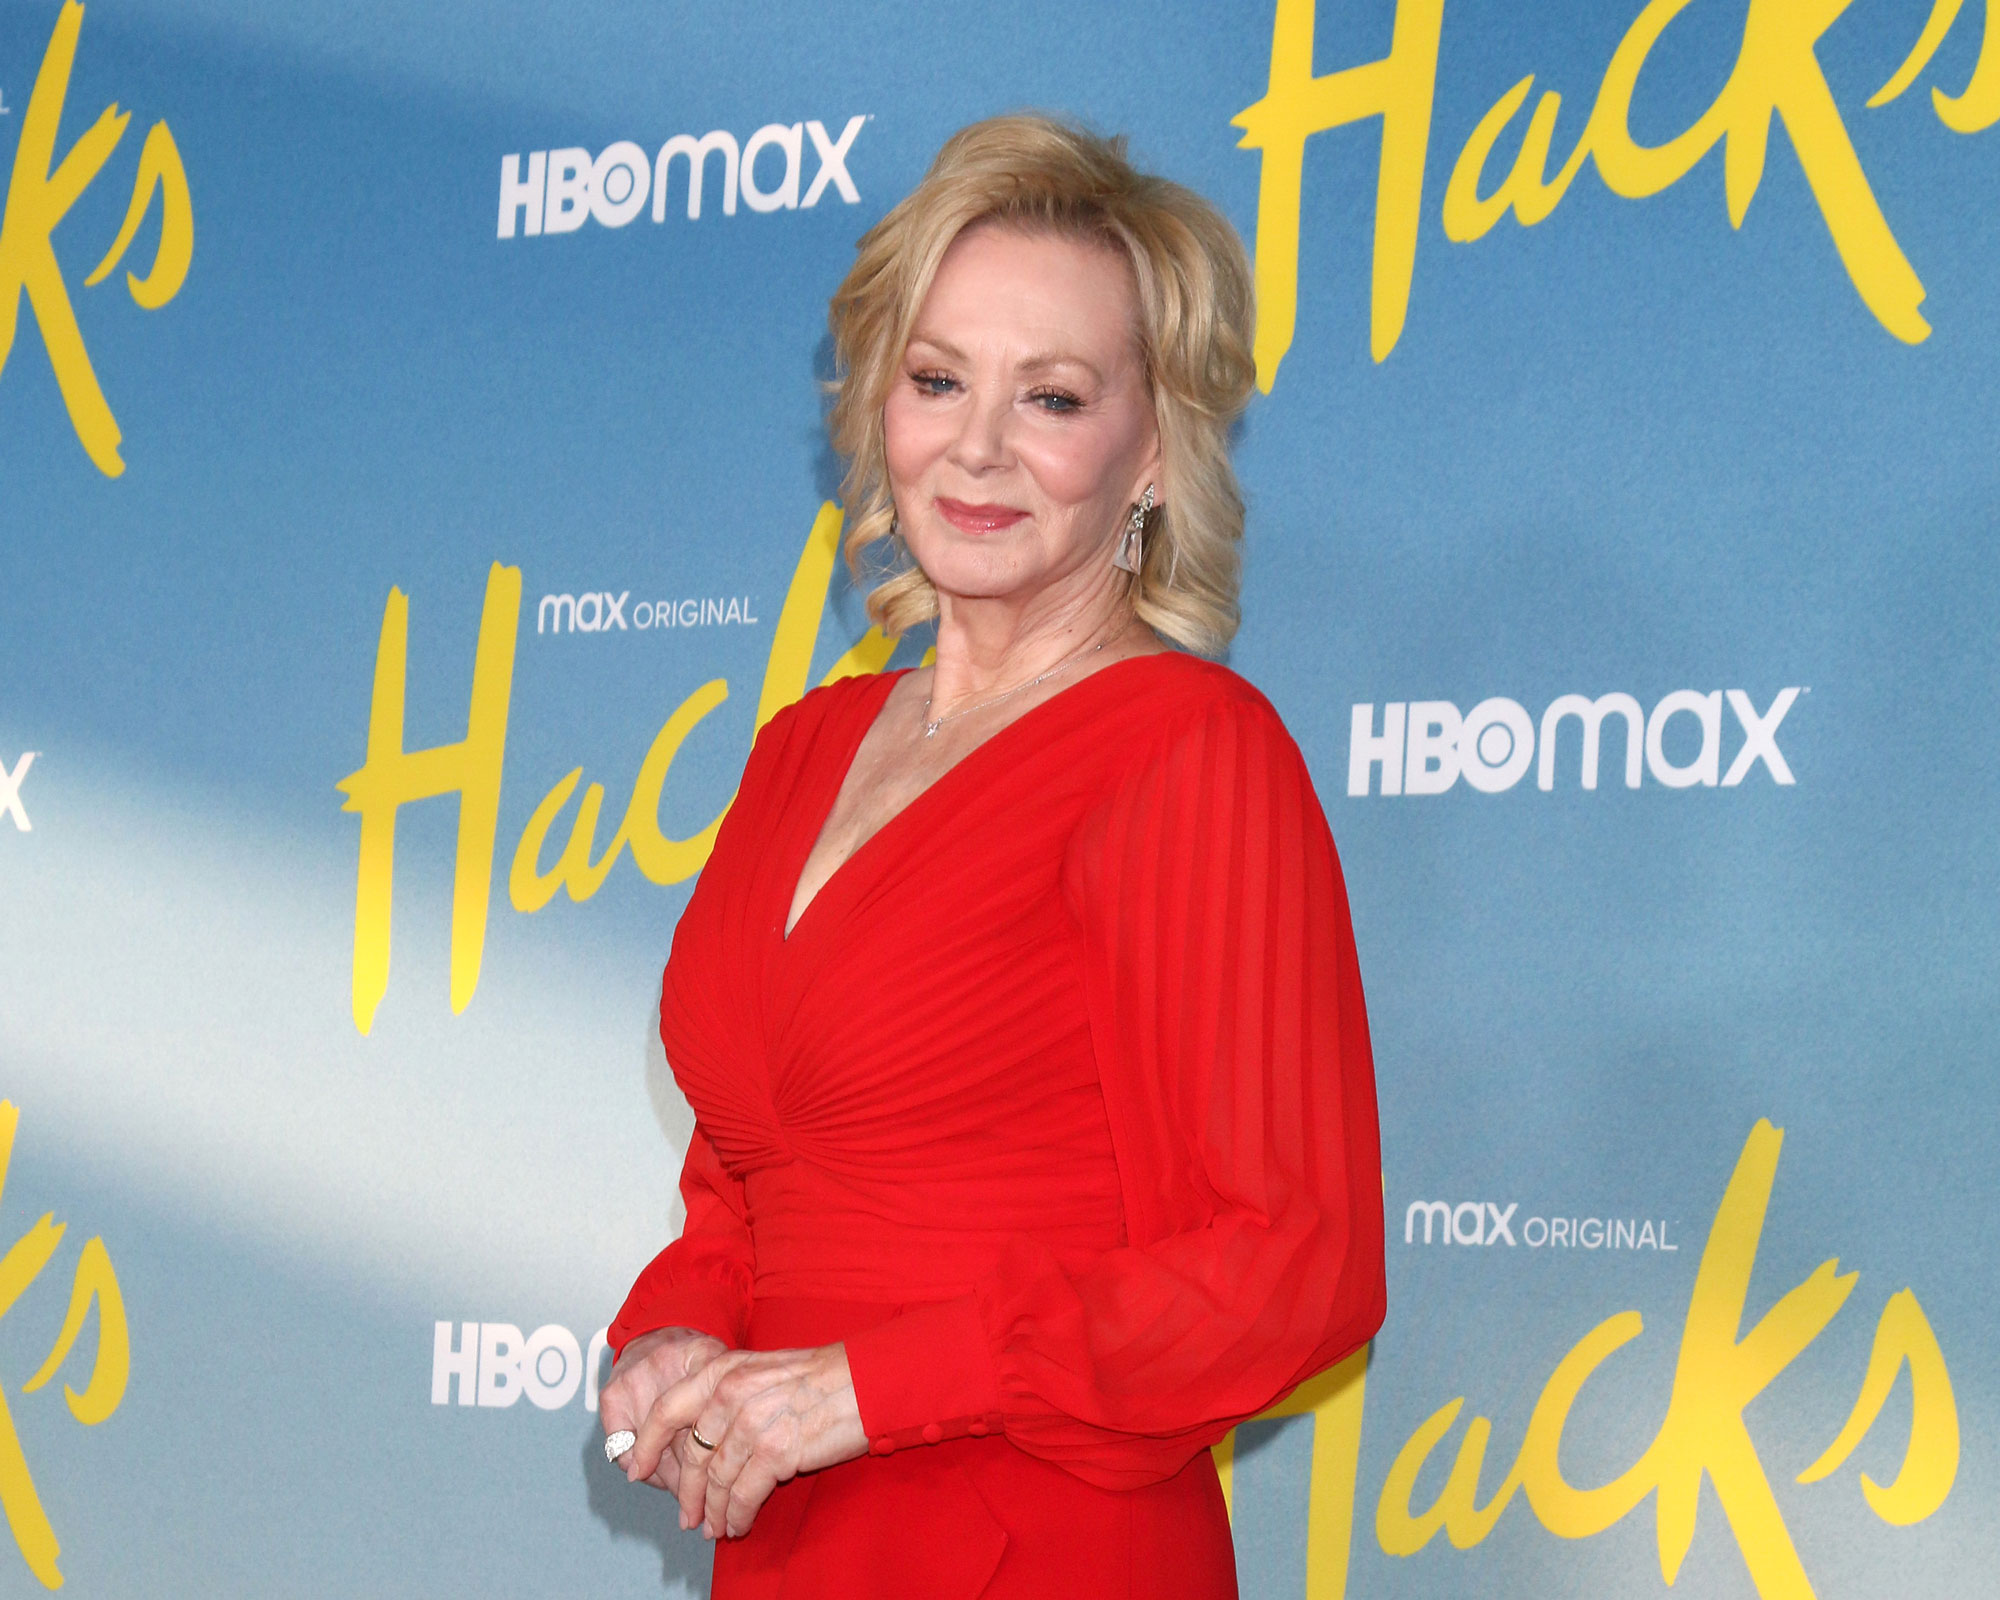 Jean Smart smiling in a red long-sleeved dress in front of a step-and-repeat for the HBO Max show "Hacks."